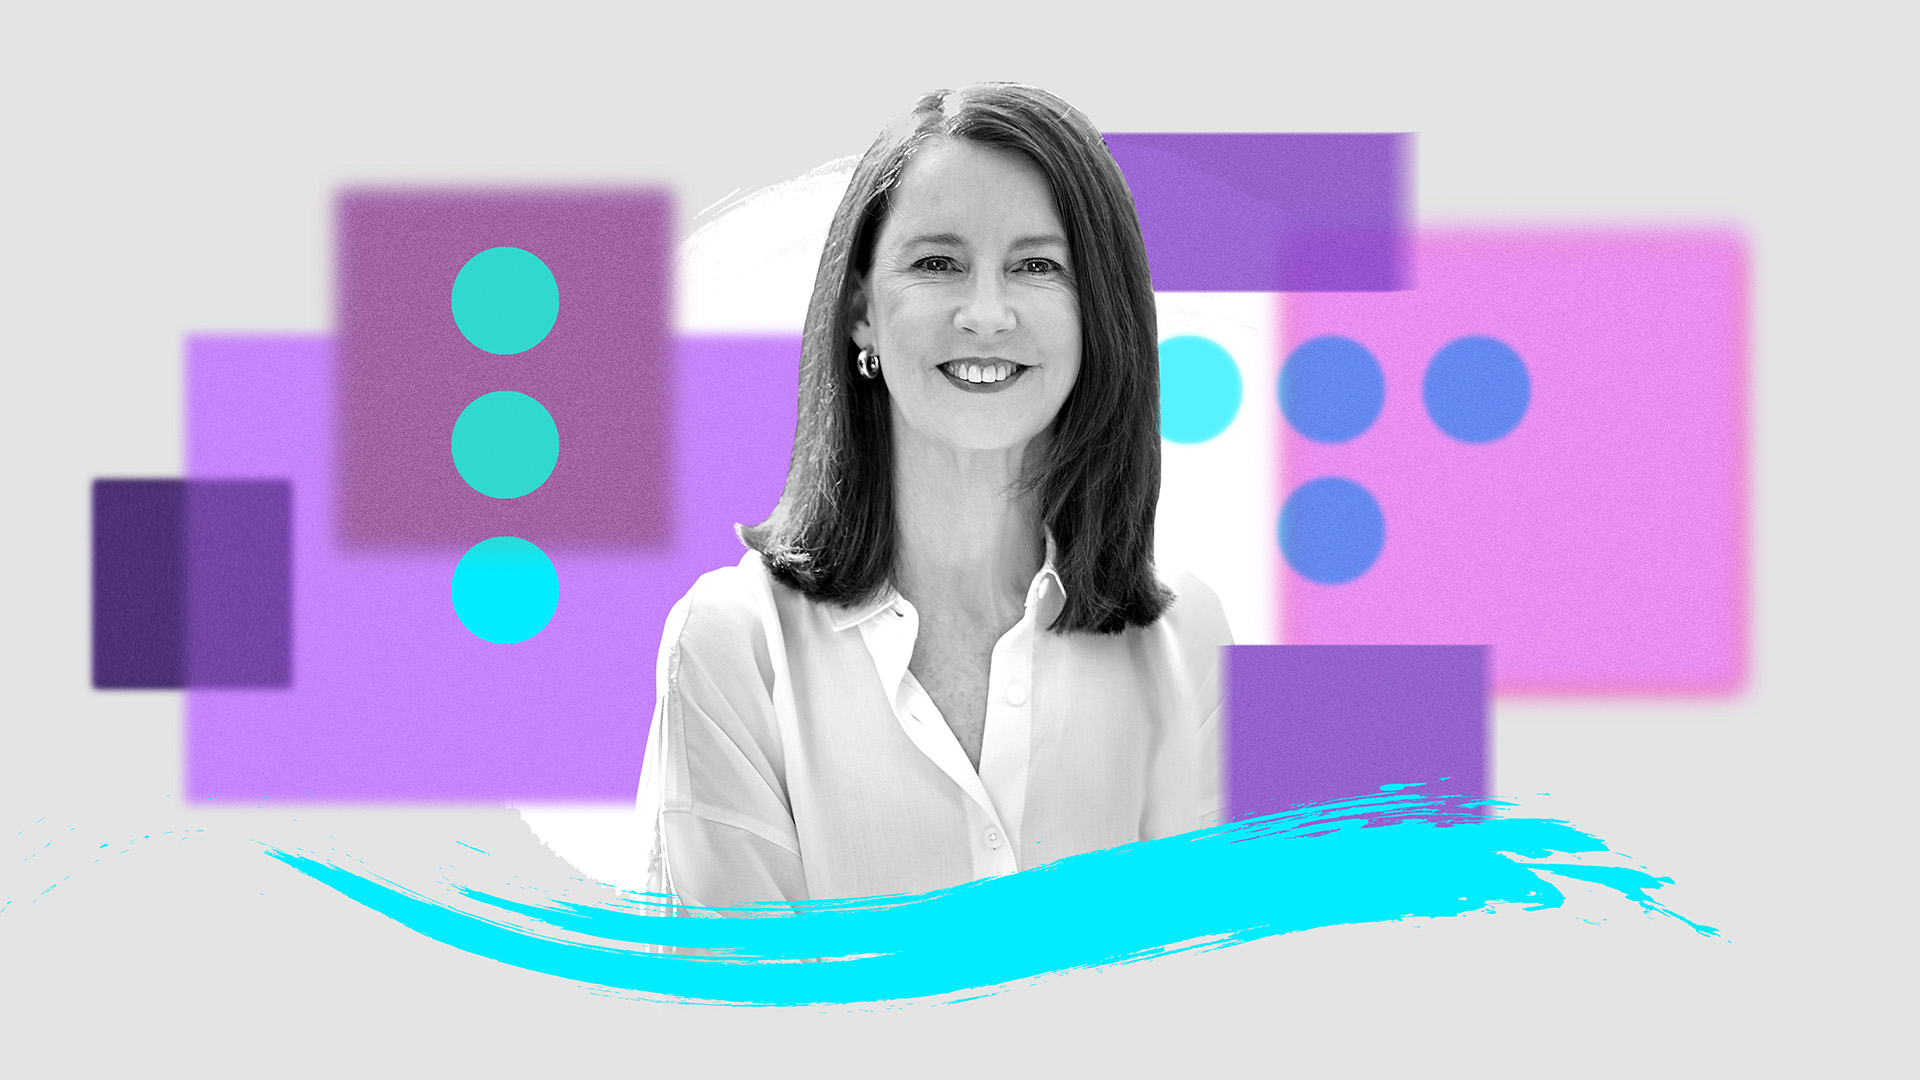 A colorful photo-illustration of podcast guest Gretchen Rubin